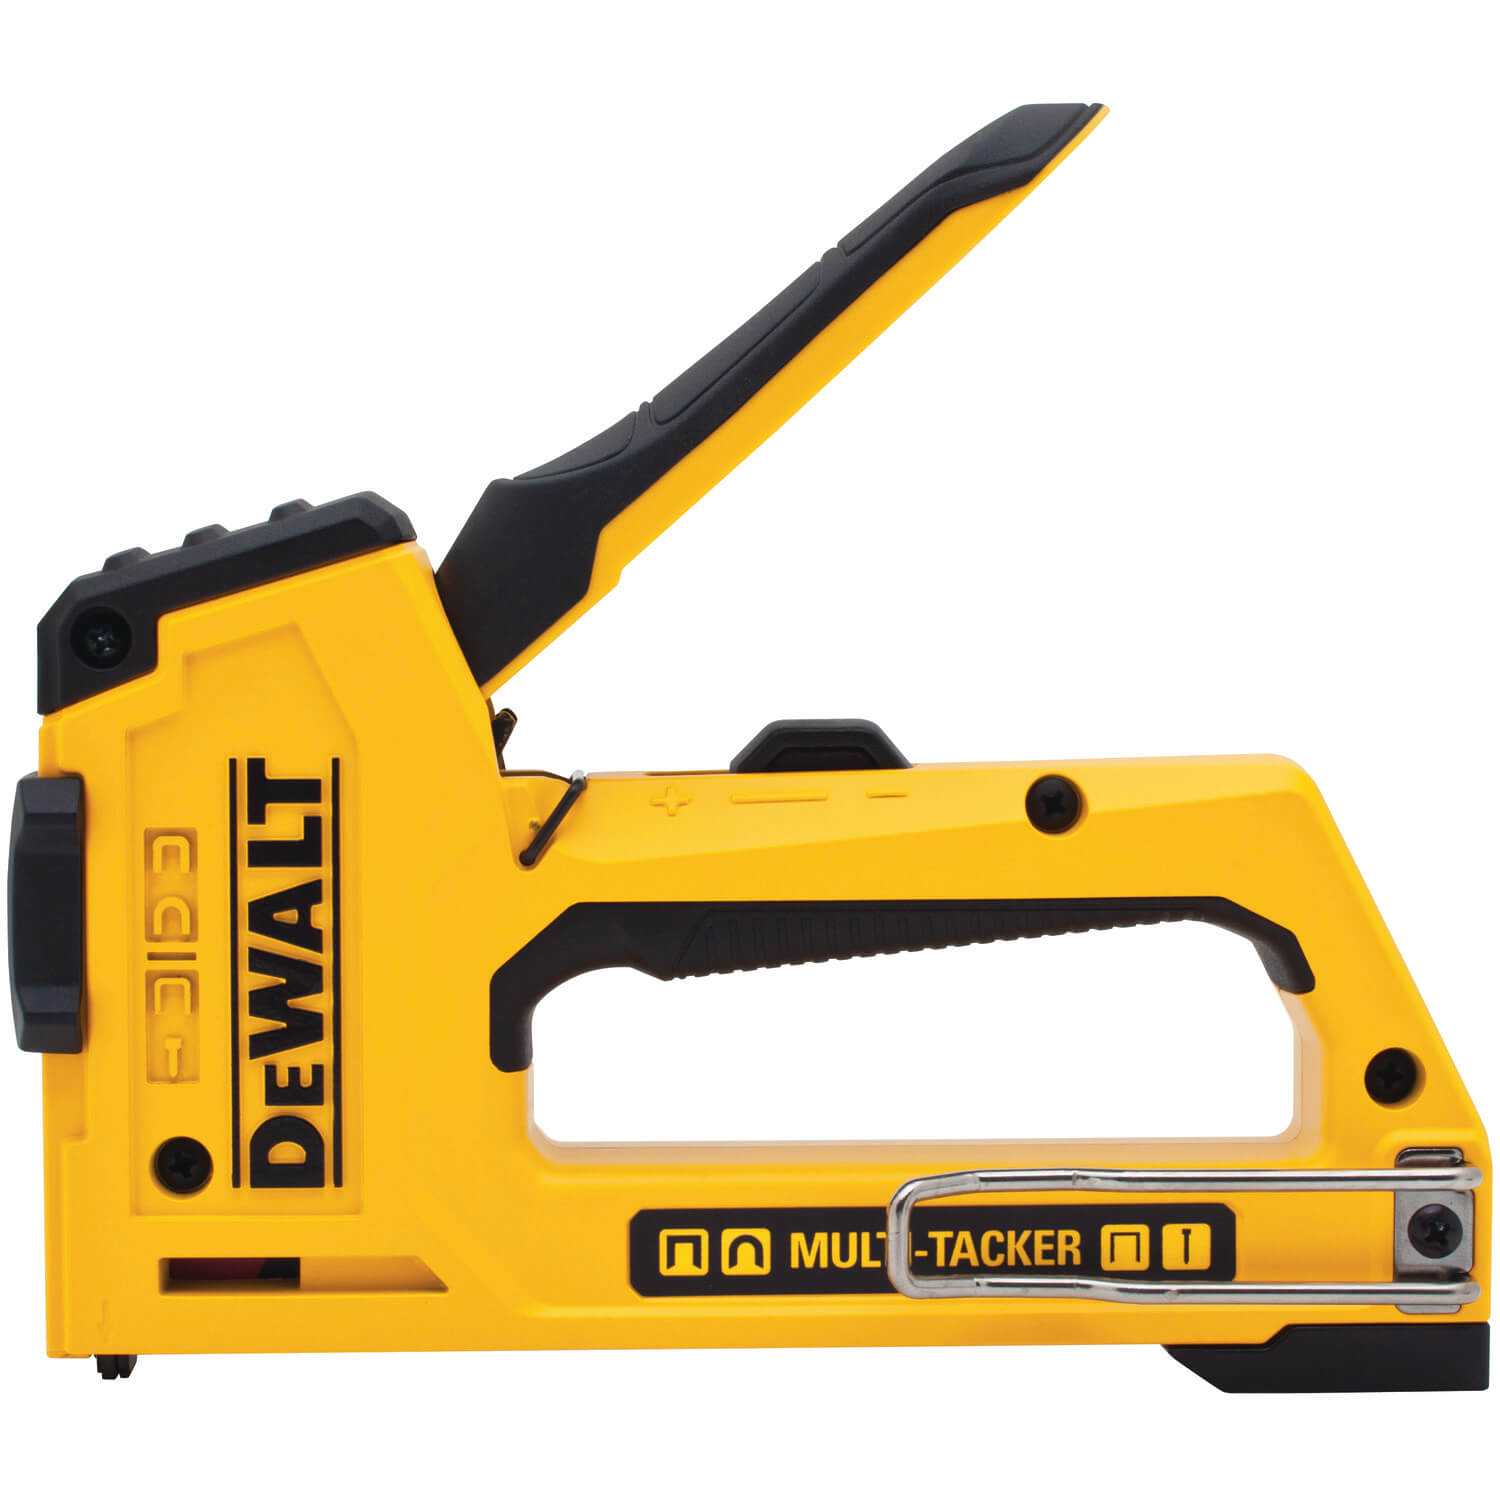 DWHTTR410 4-IN-1 MULTI-TACKER - wise-line-tools